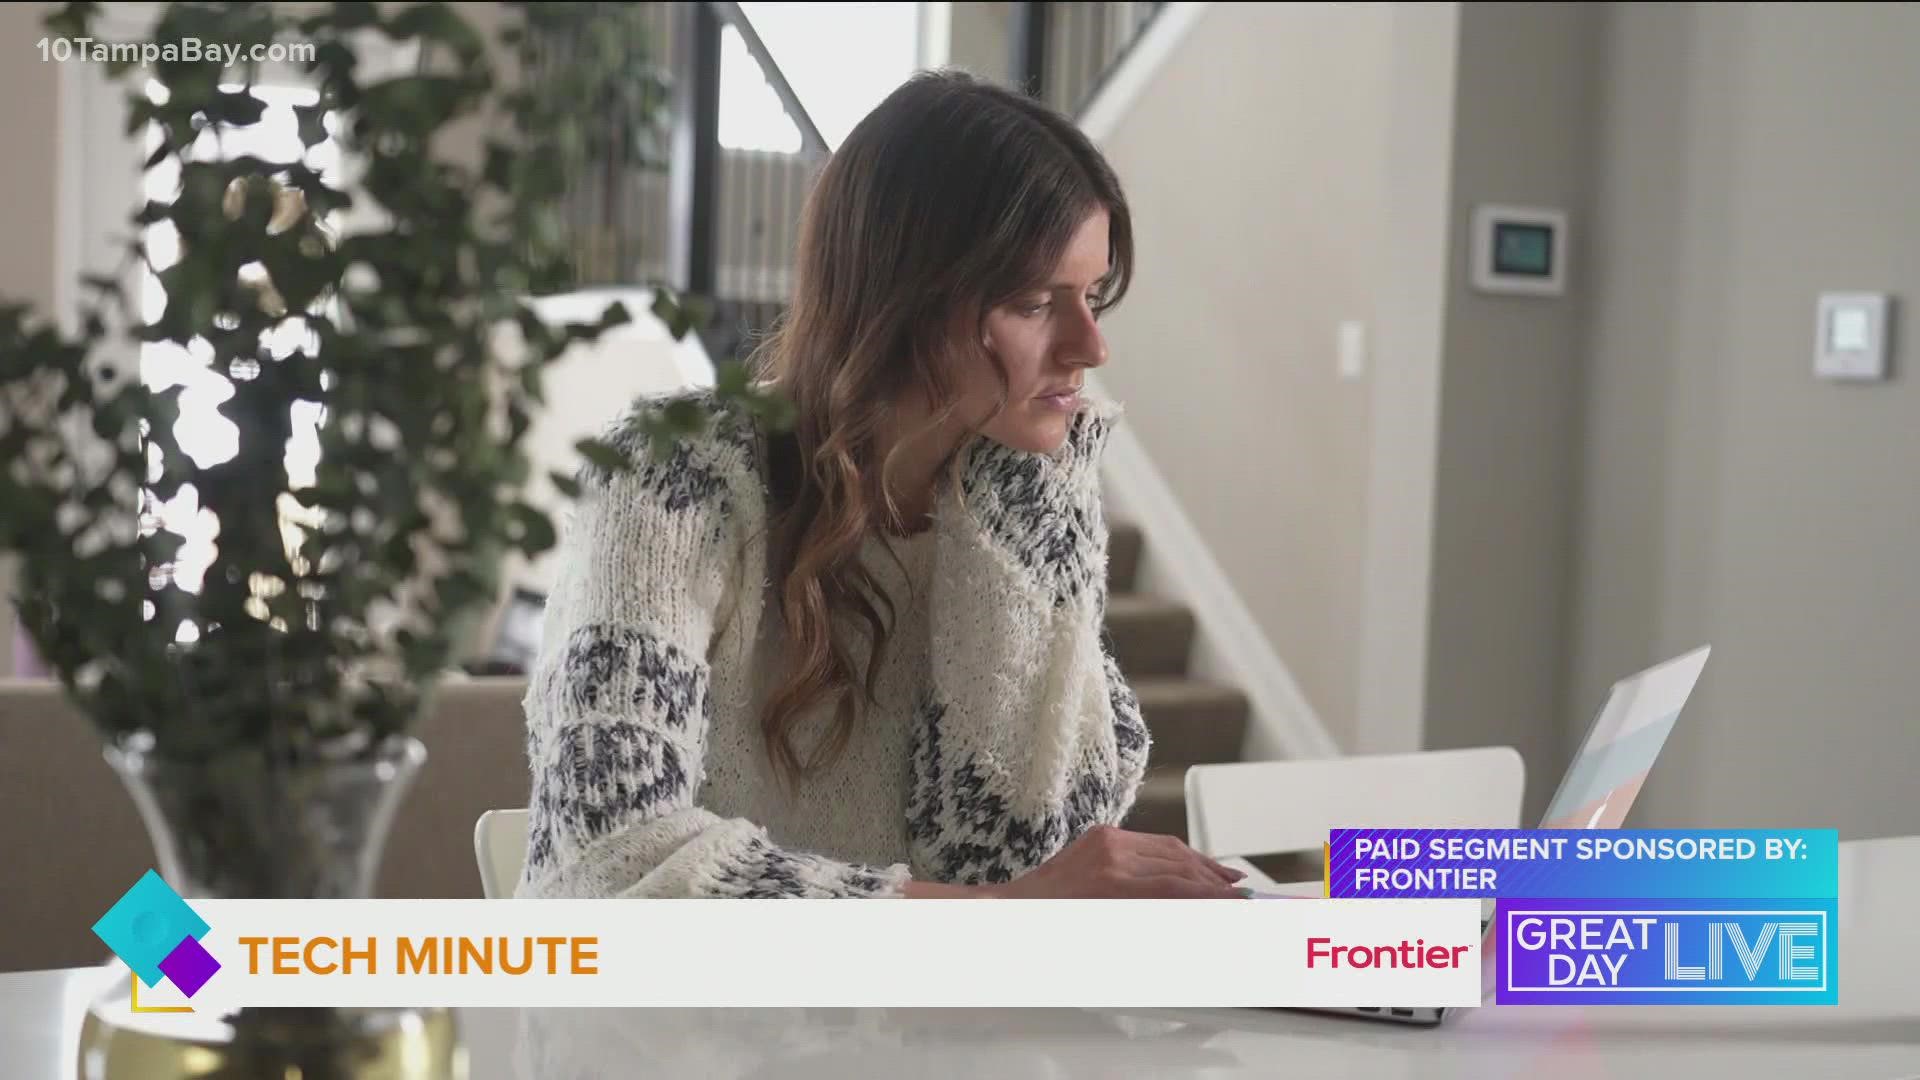 Paid segment sponsored by Frontier.